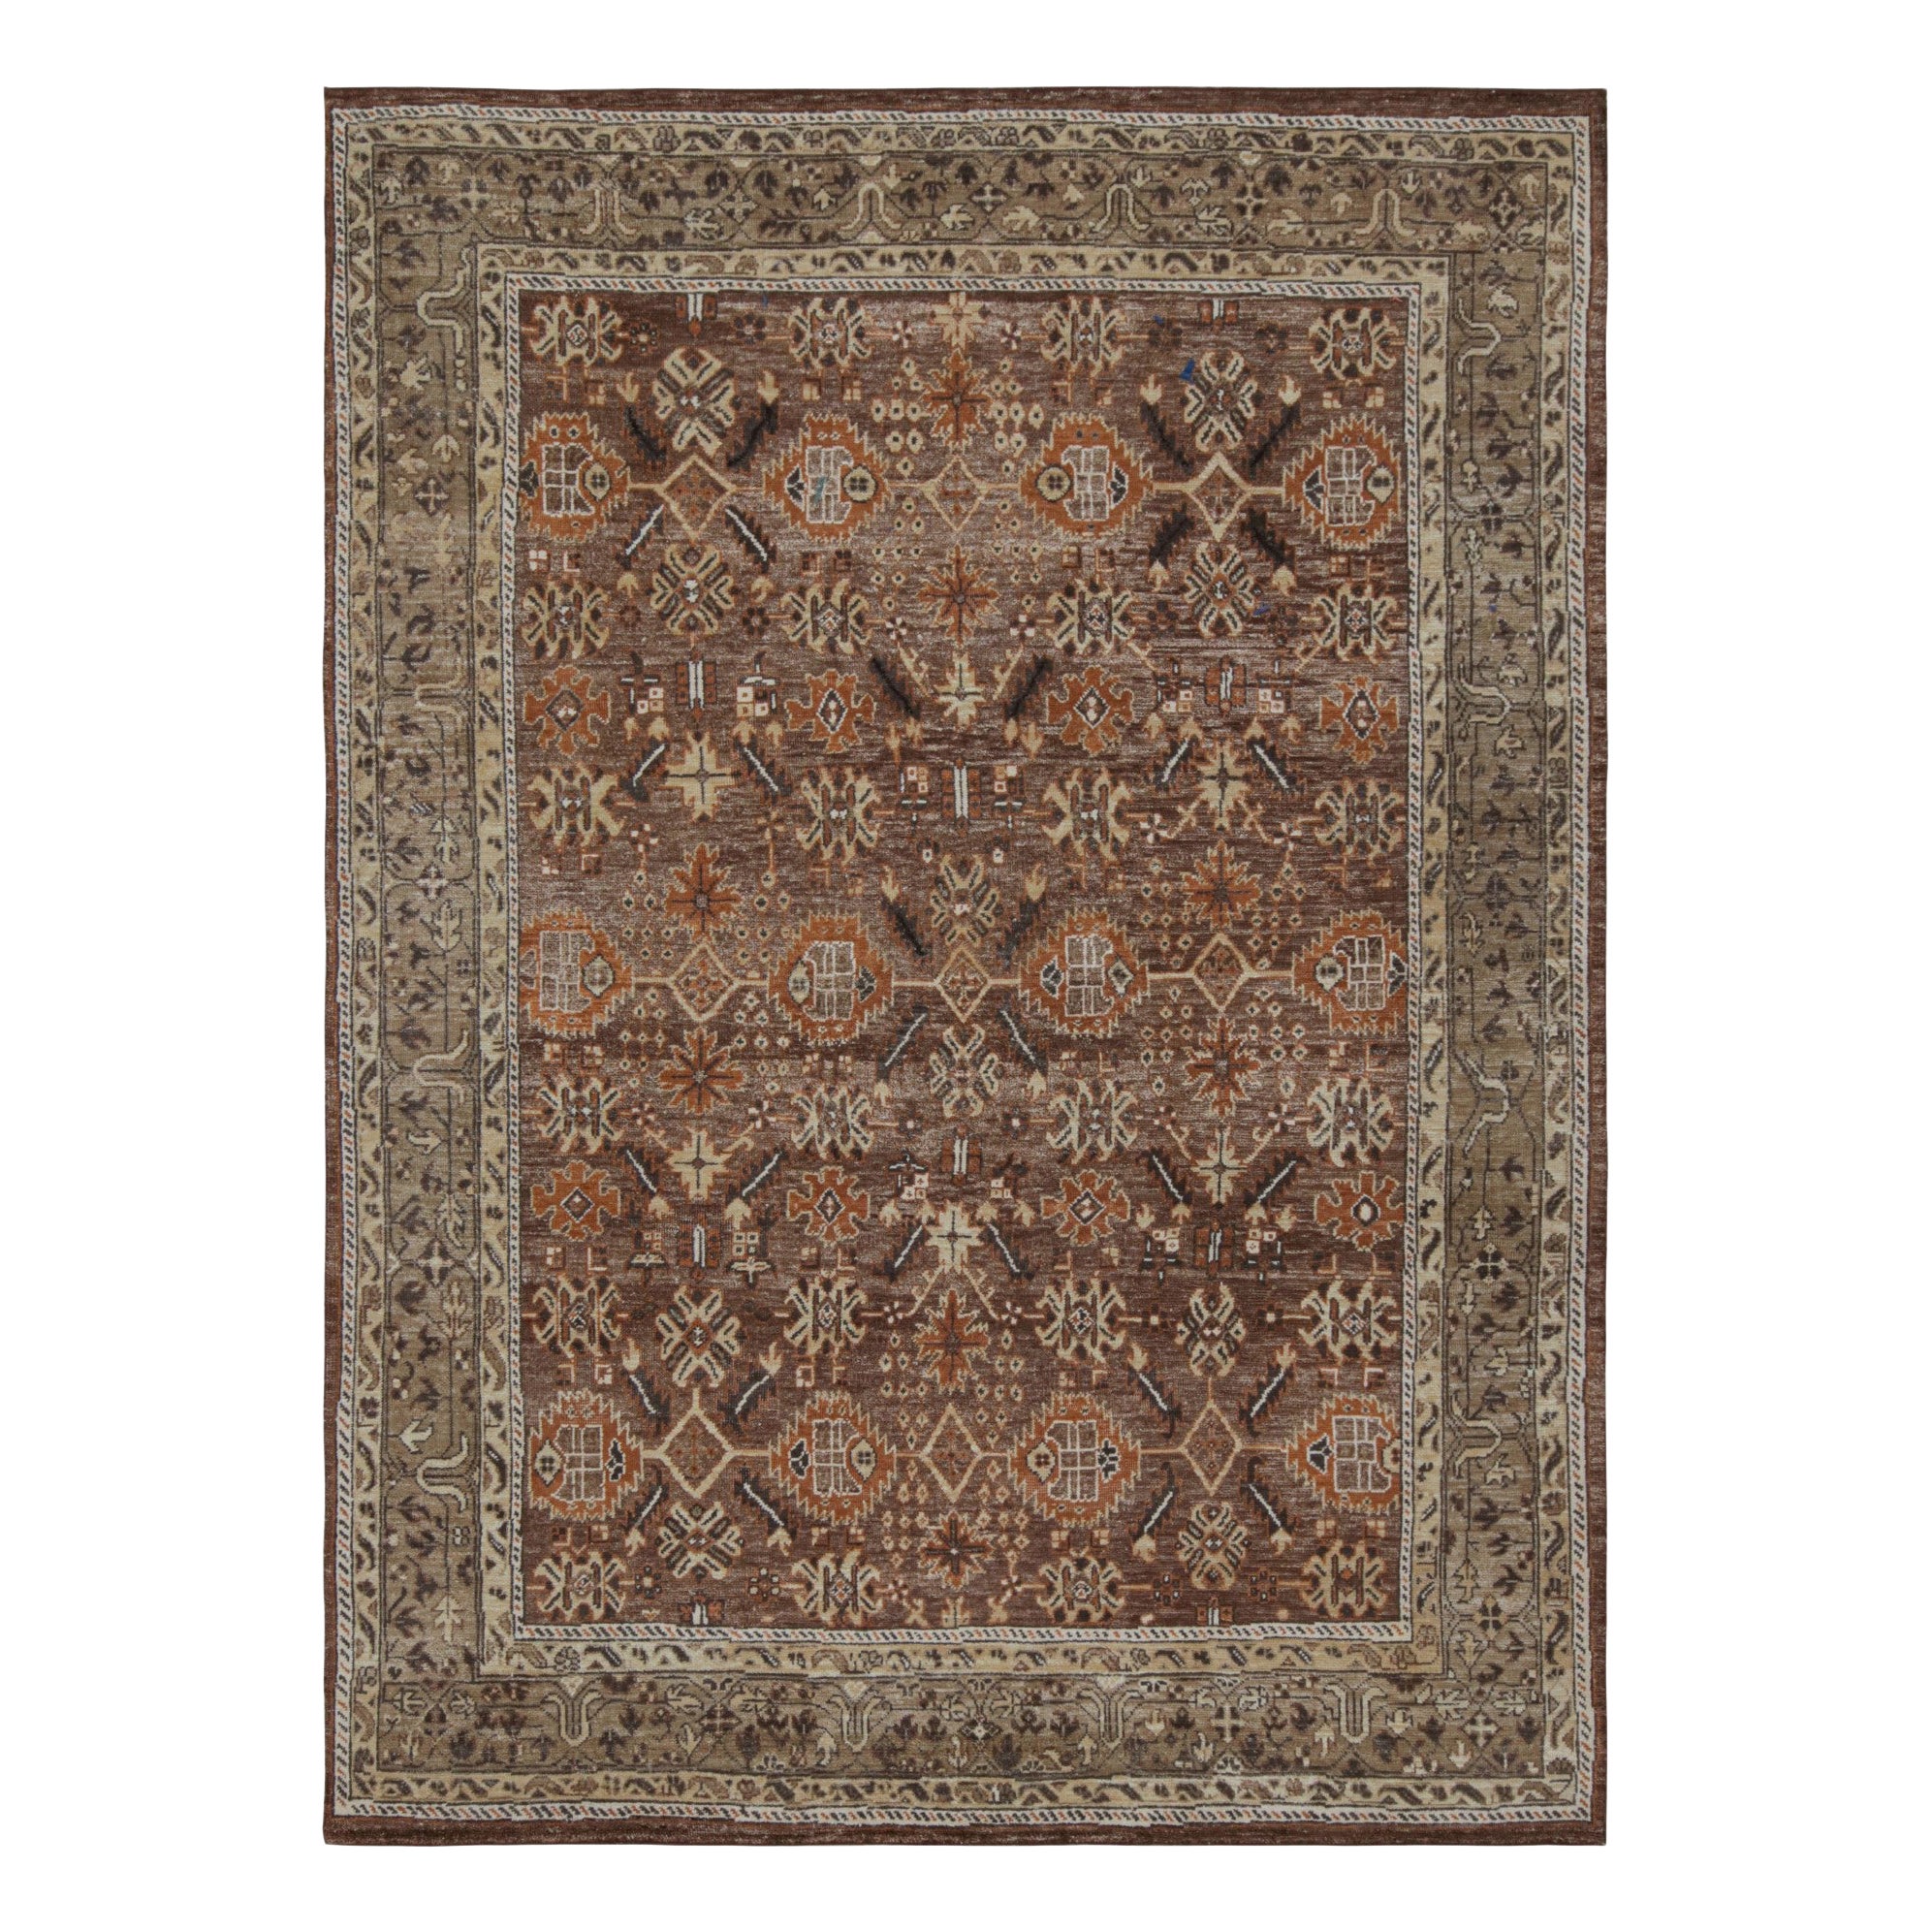 Rug & Kilim’s Oushak Style Rug with Geometric Patterns in Brown and Rust Tones